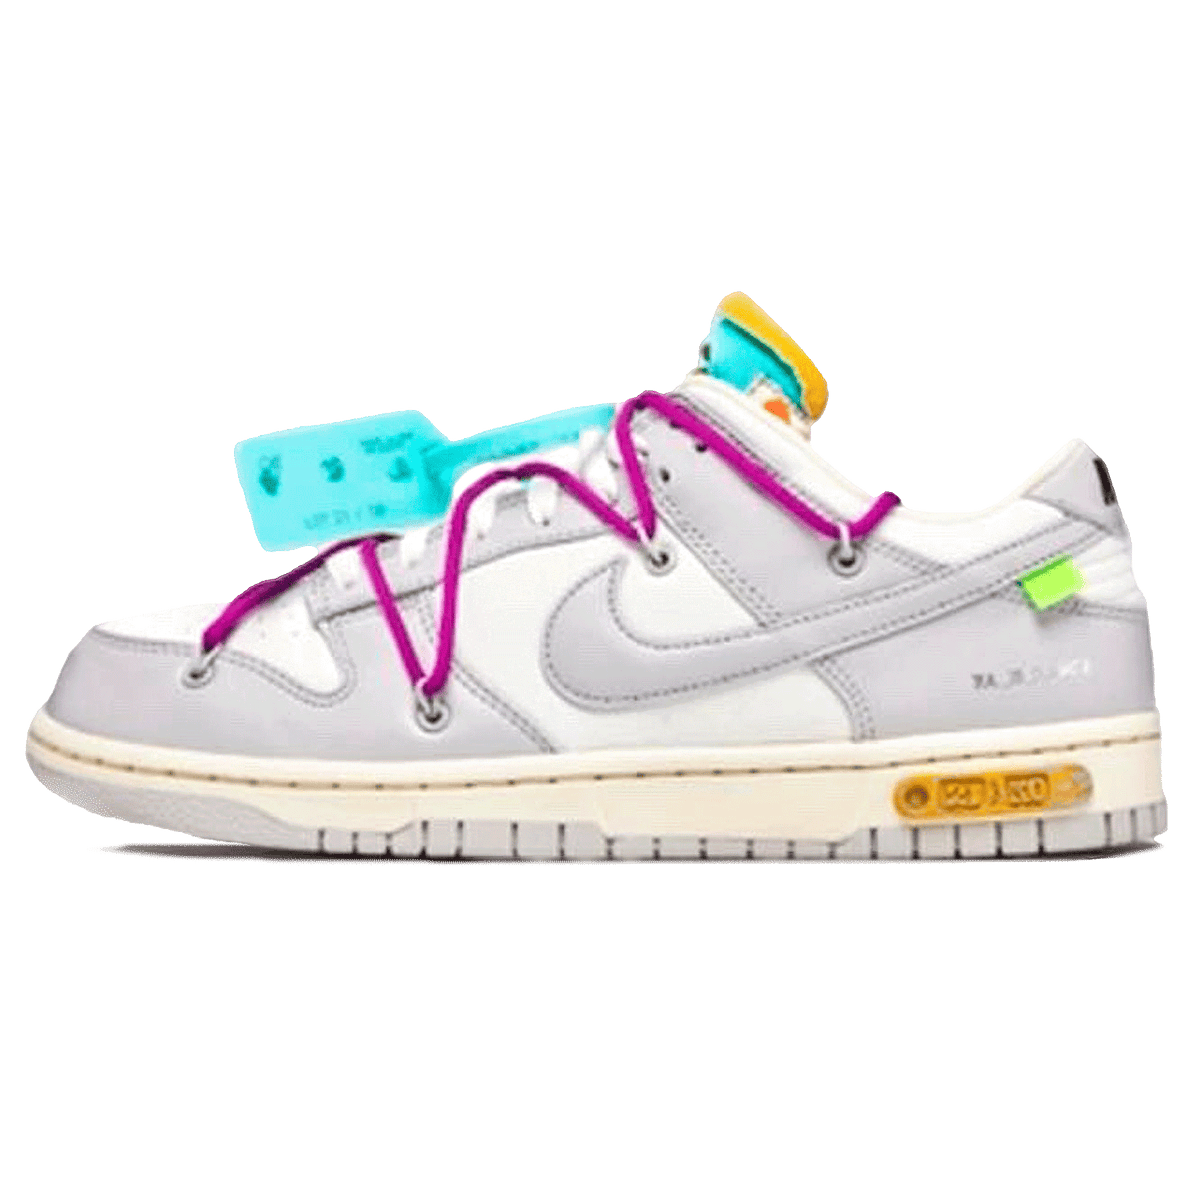 Off-White x Nike Dunk Low 'Lot 21 of 50' - CerbeShops